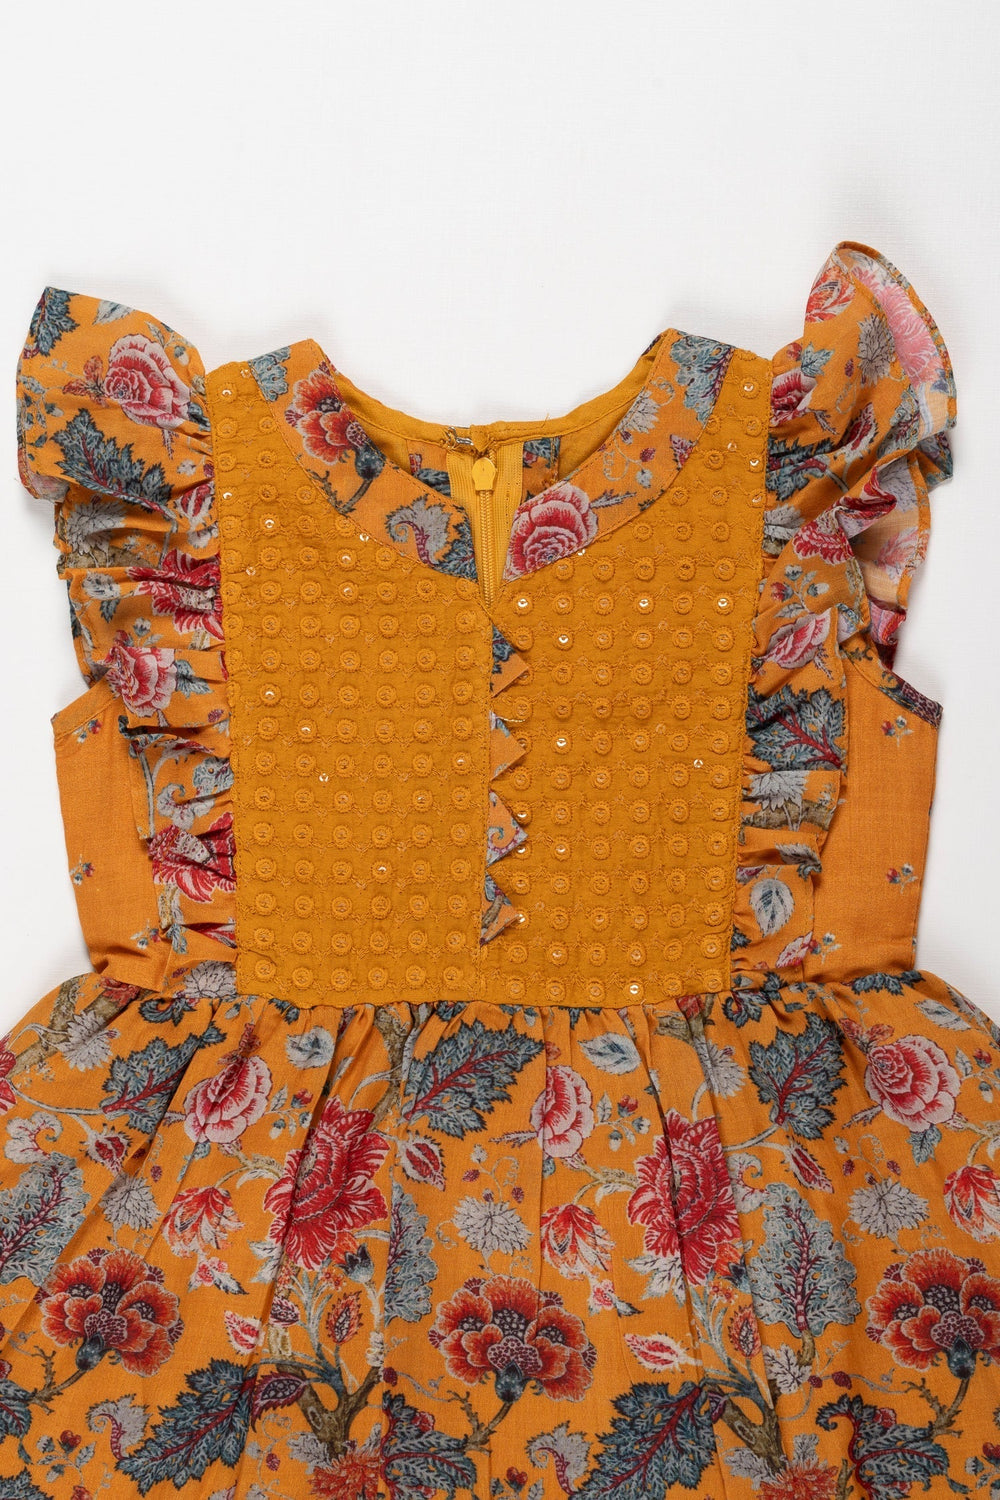 The Nesavu Girls Cotton Frock Sunshine and Blooms: Girls Mustard Floral Cotton Frock with Ruffle Accents Nesavu Shop Mustard Floral Ruffle Girls Cotton Frock | Ideal Summer Wear | The Nesavu